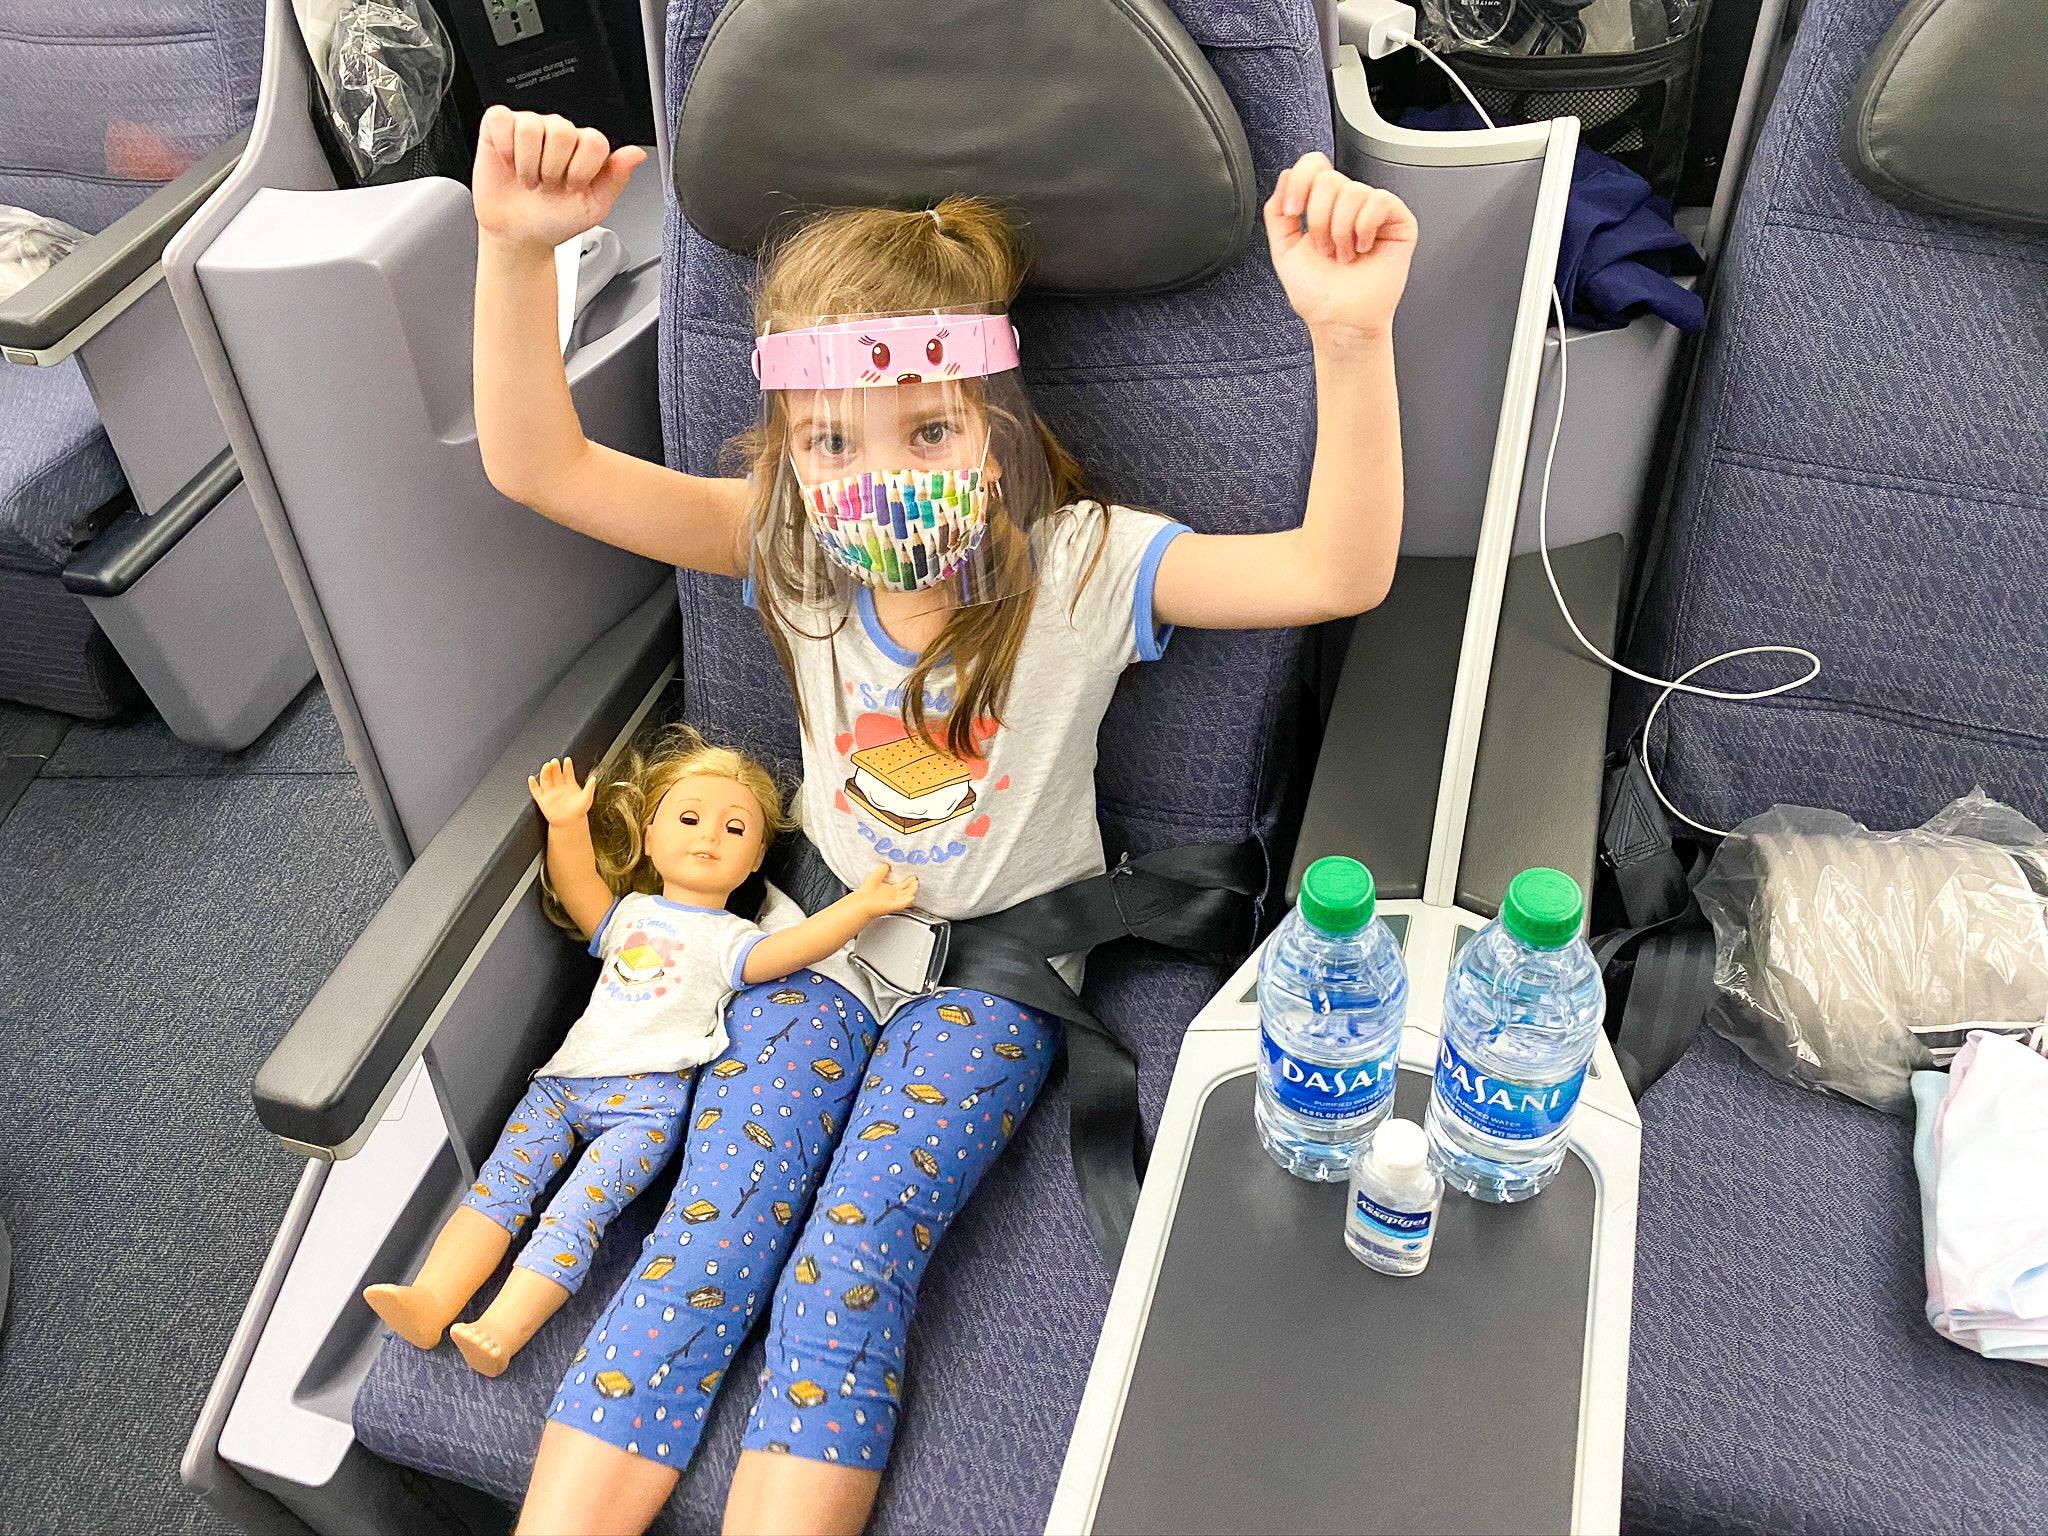 American Girl Doll in United Boeing 787 Dreamliner Polaris Business Class